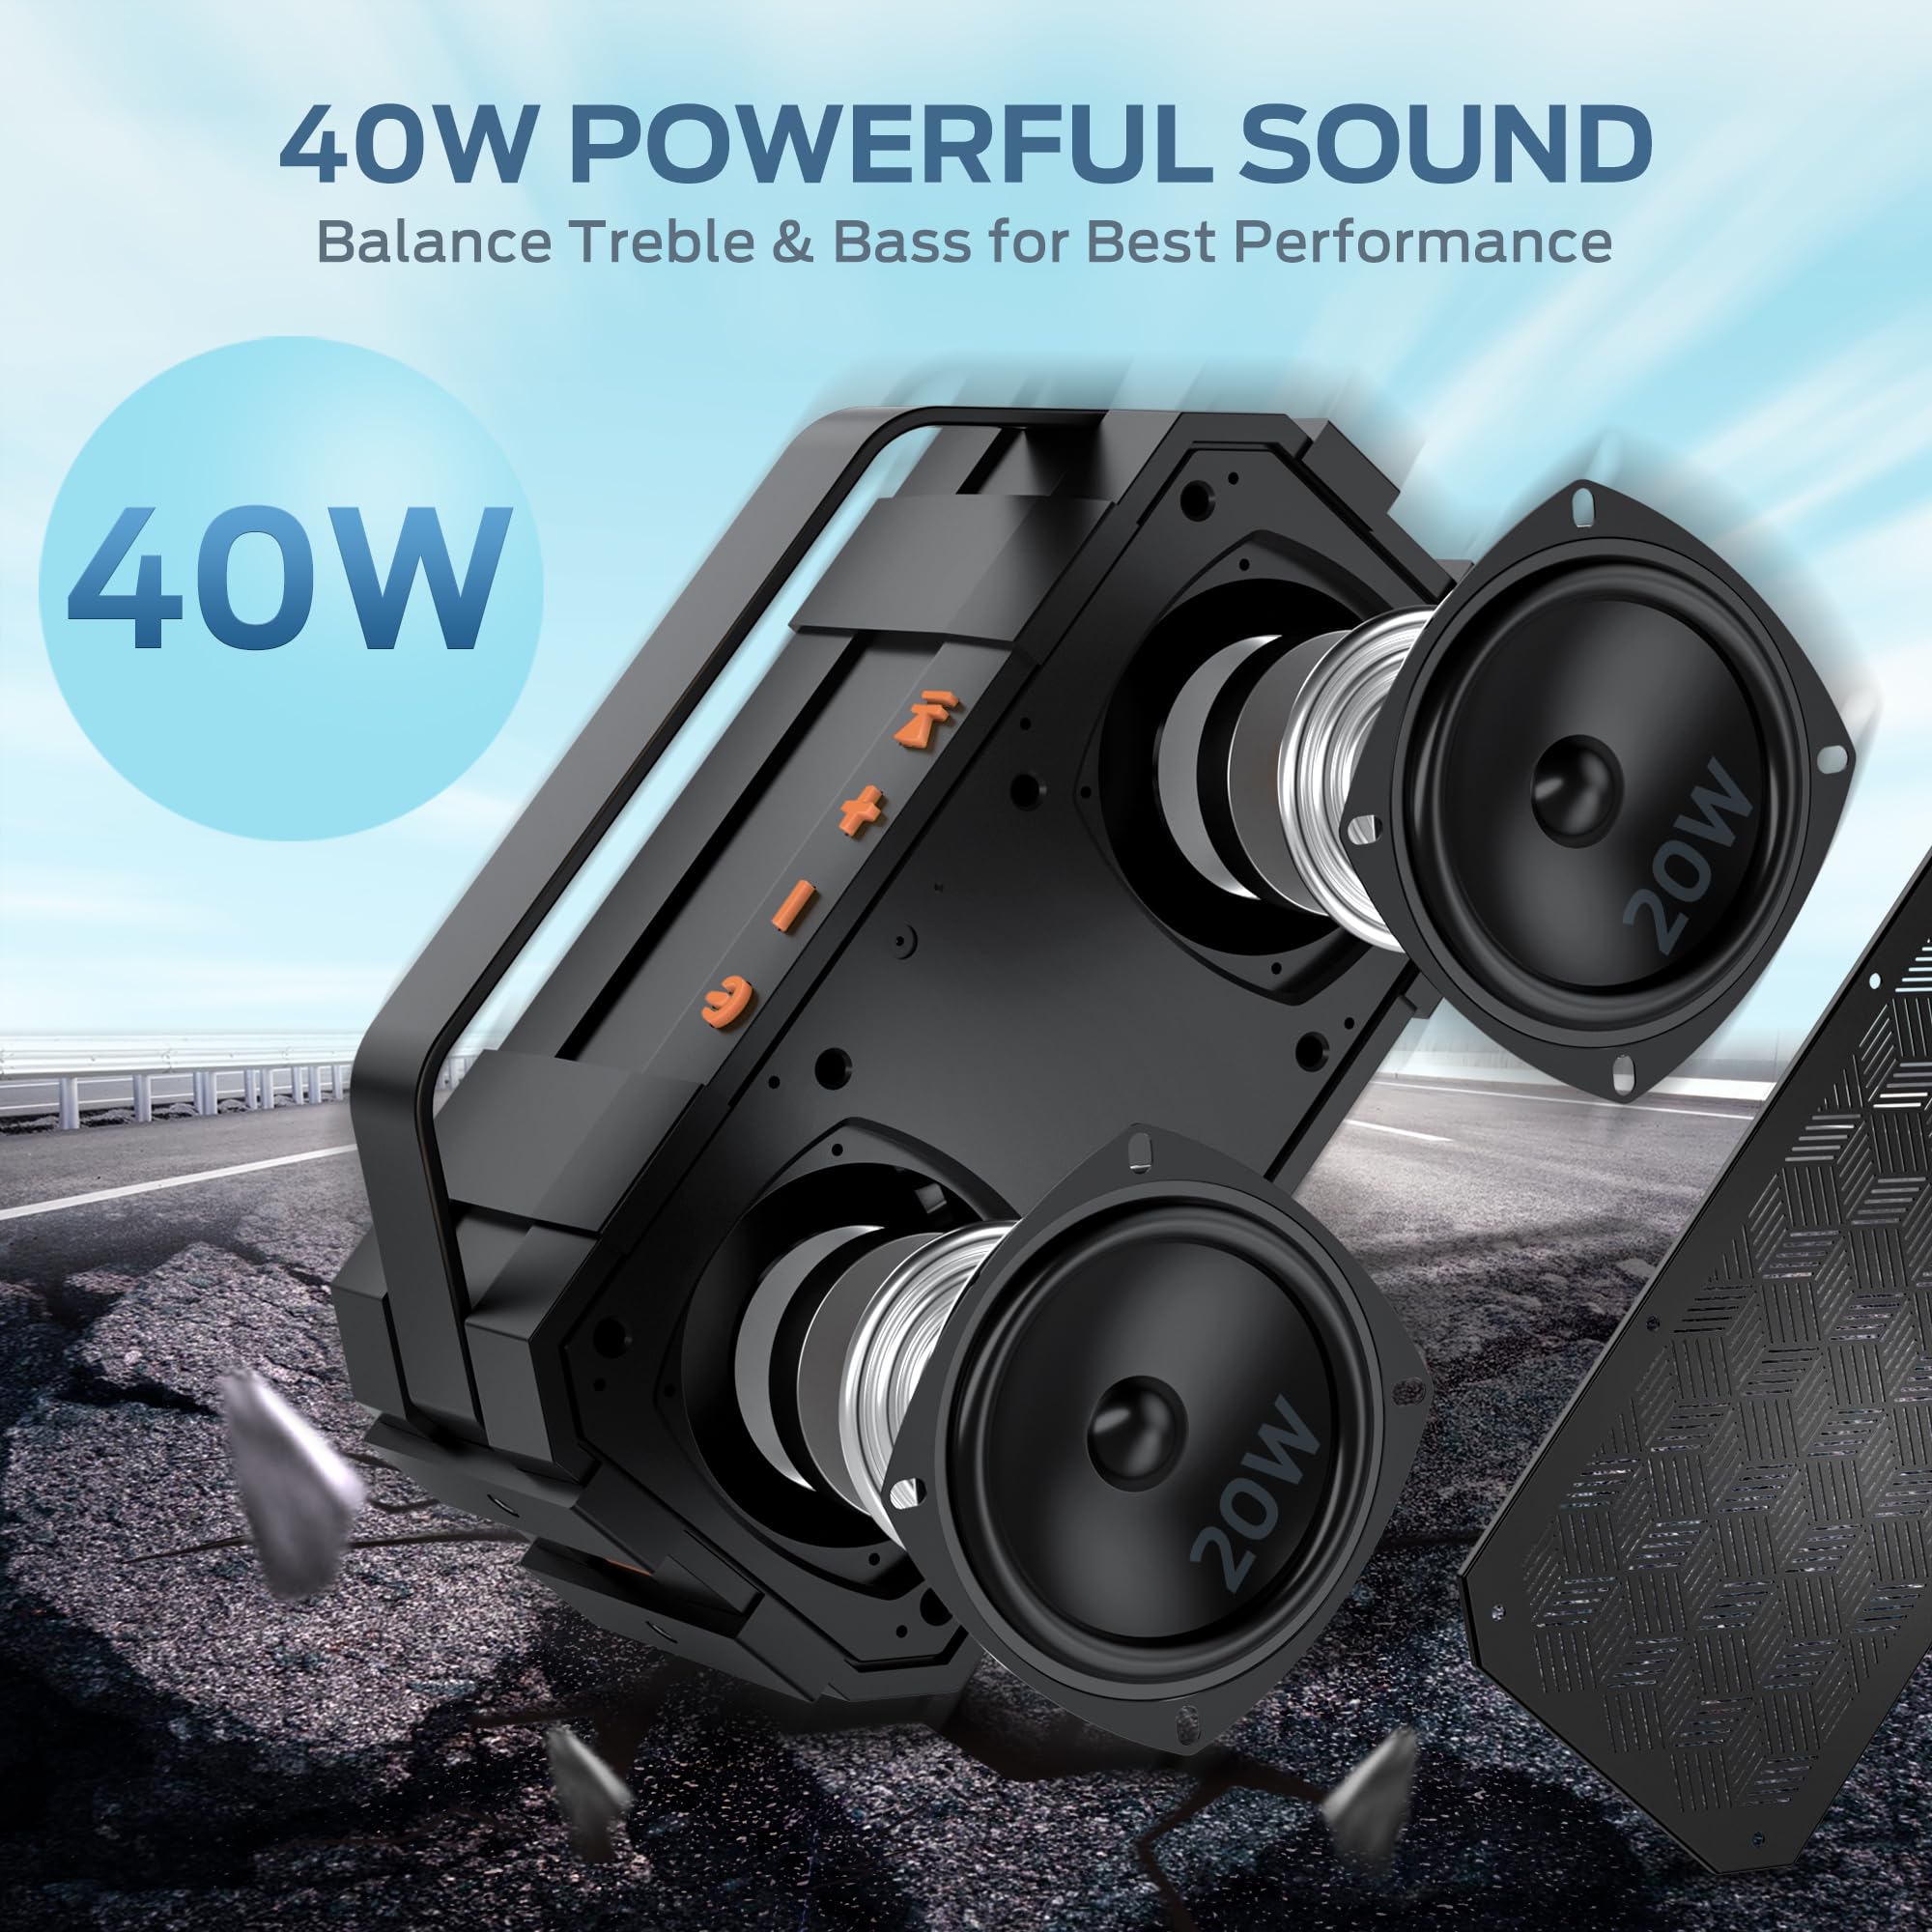 BUGANI Bluetooth Speakers, 40W Deep Bass Portable Loud Bluetooth Speaker, 24H Playtime, IPX6 Waterproof Outdoor Speaker with Handle, TWS Pairing Built-in Mic Supports TF Card, AUX for Home, Outdoor